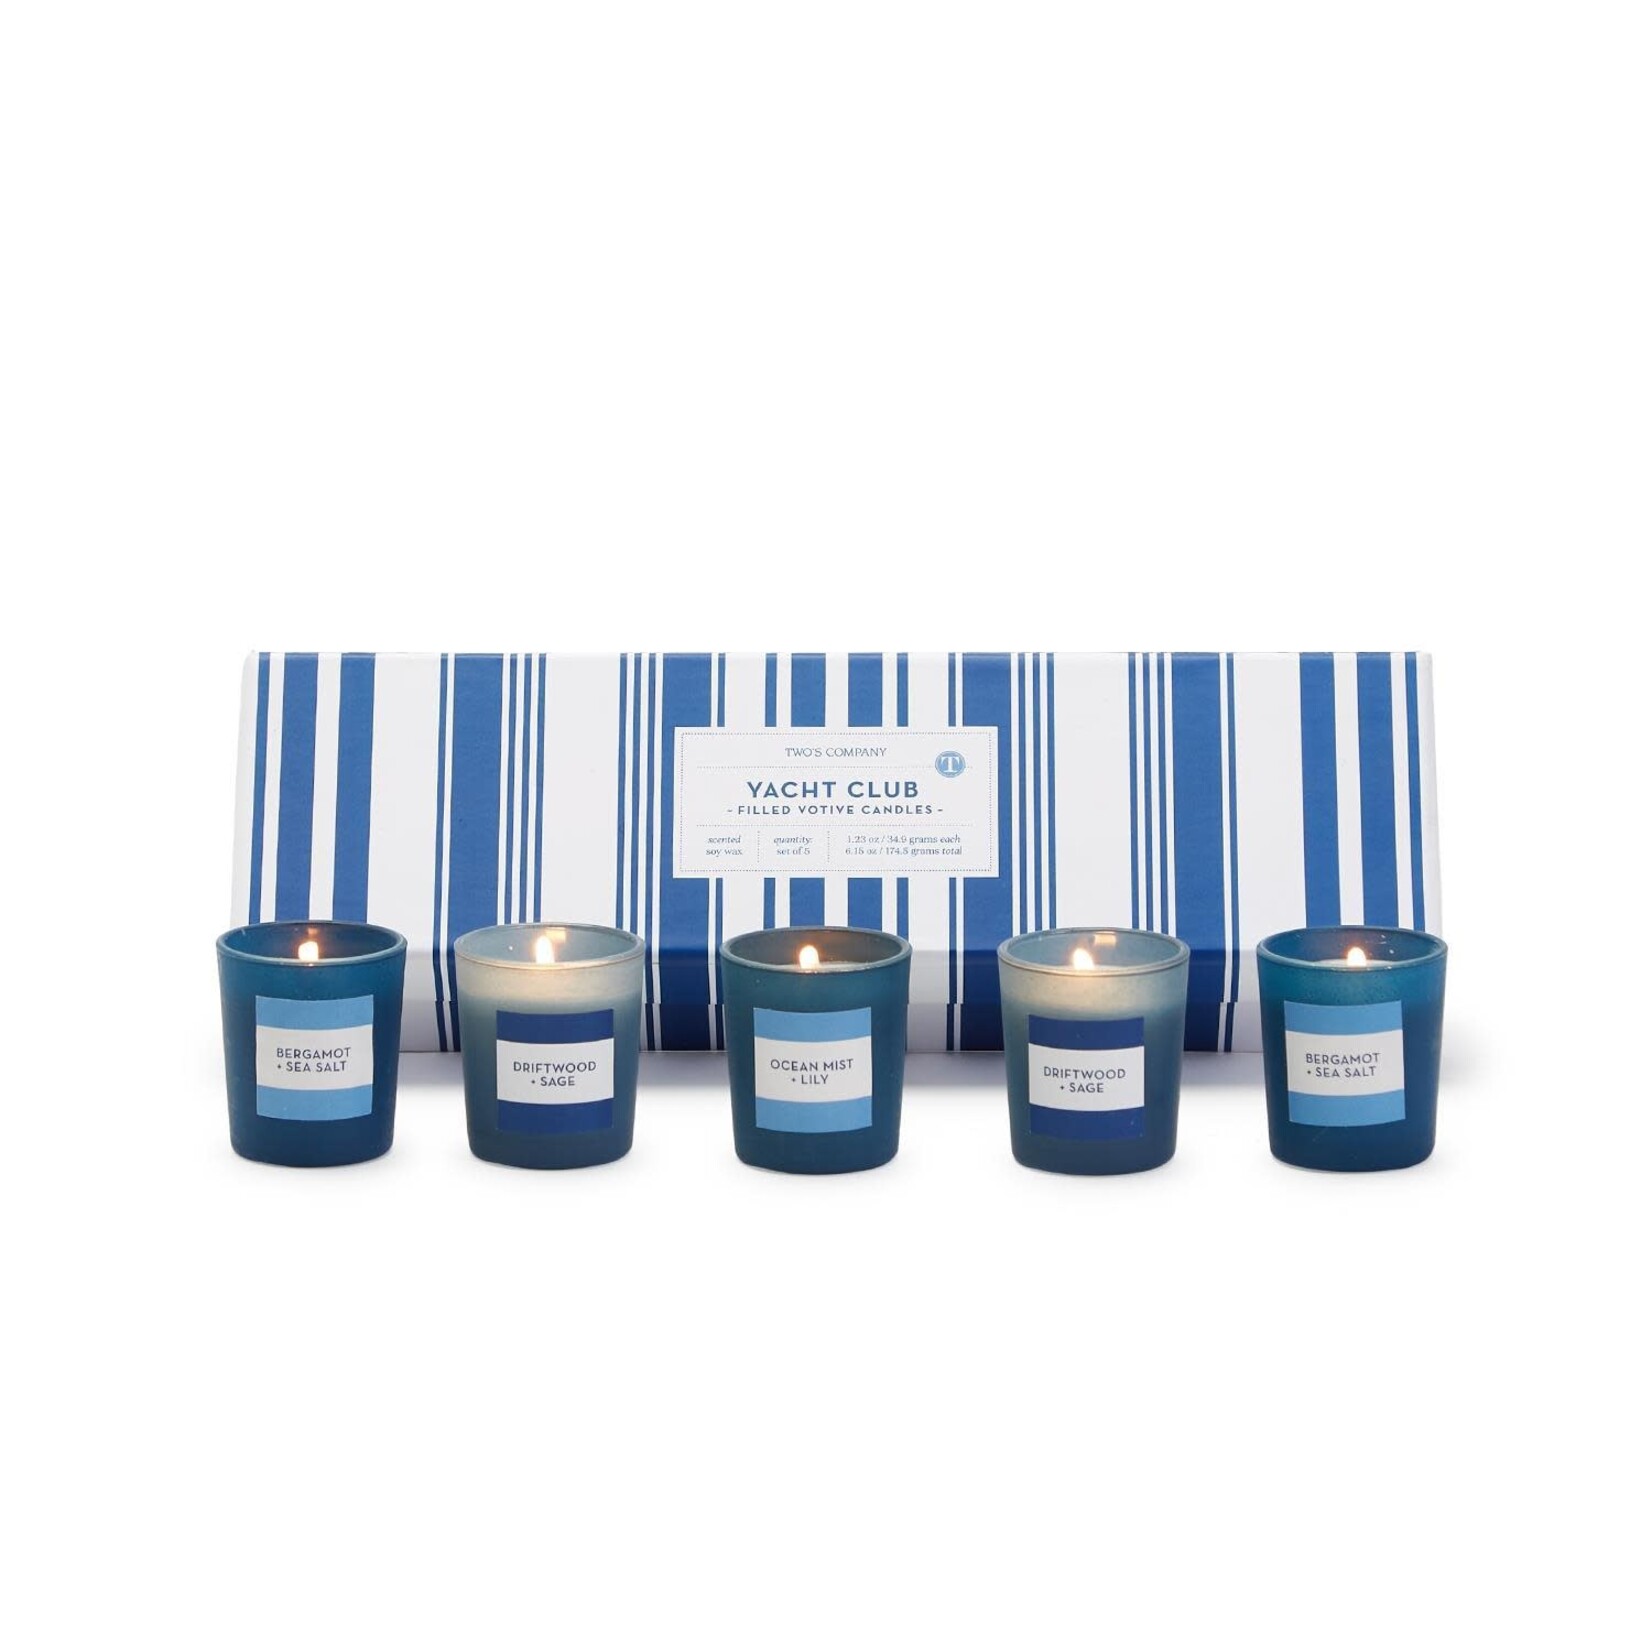 Outside The Box Set Of 5 Yacht Club 3 Scents Votive Candles In Gift Box